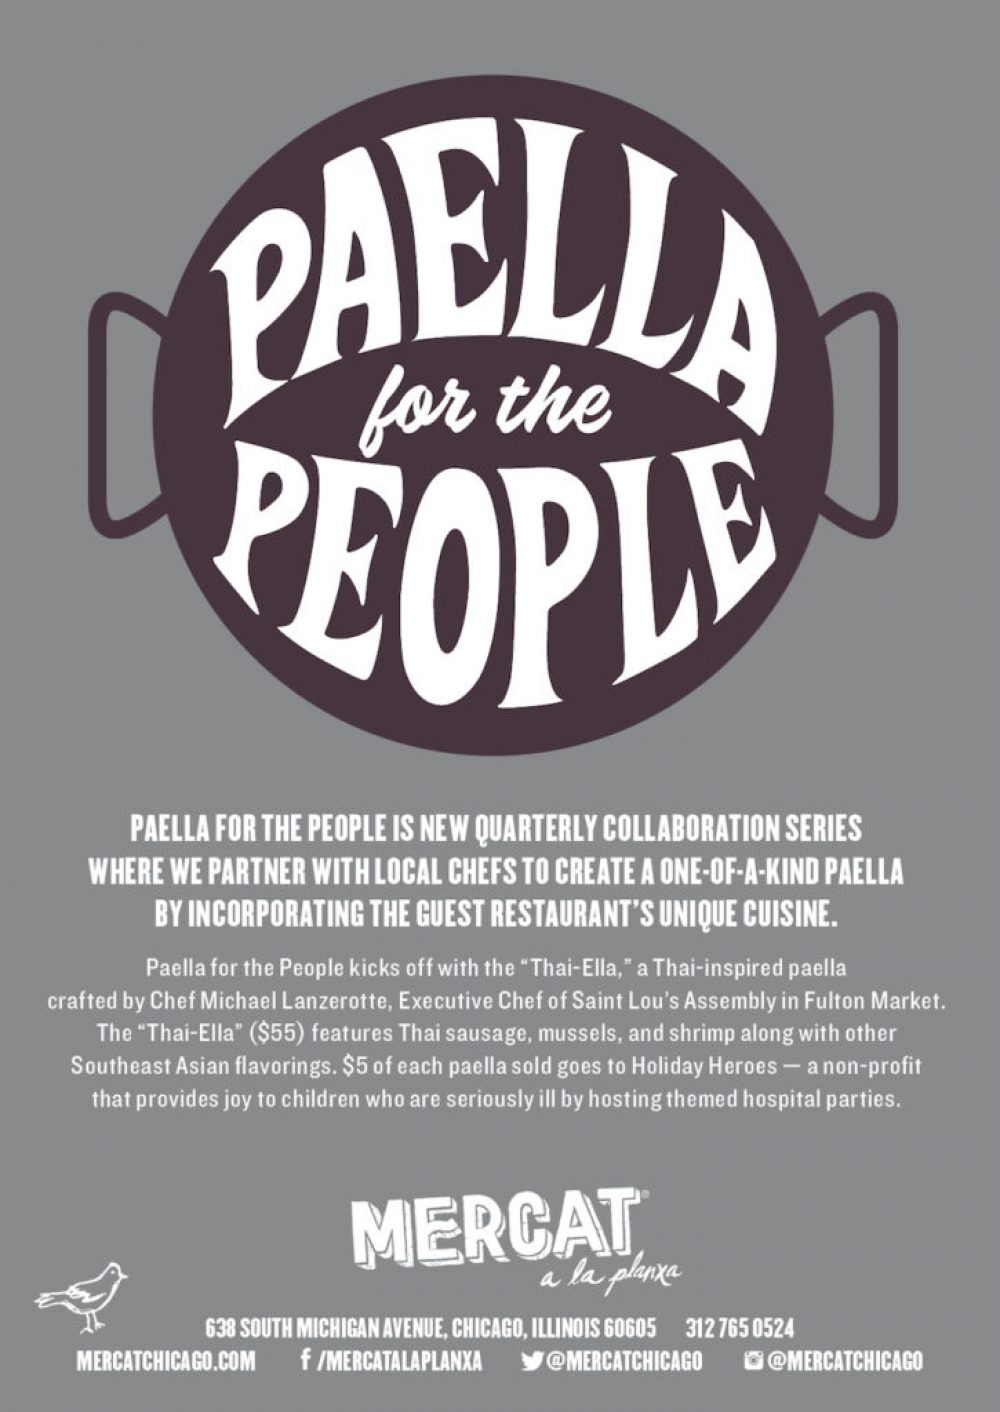 Paella for the People